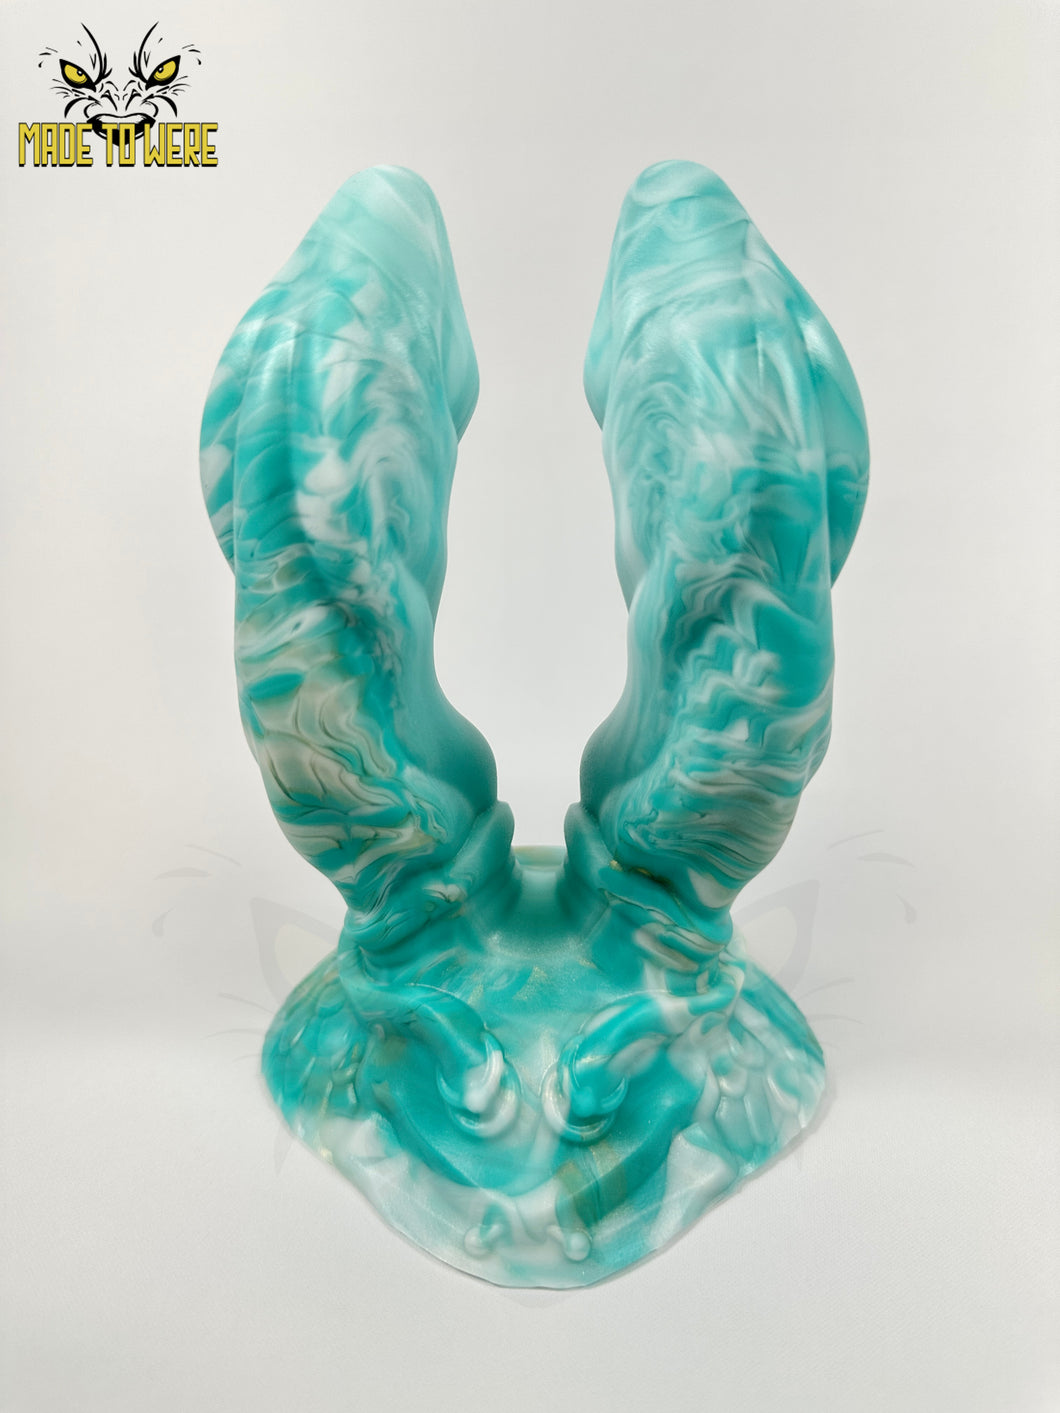 Small Crowley, Double Shaft, Soft 00-30 Firmness, Teal Gold Marble